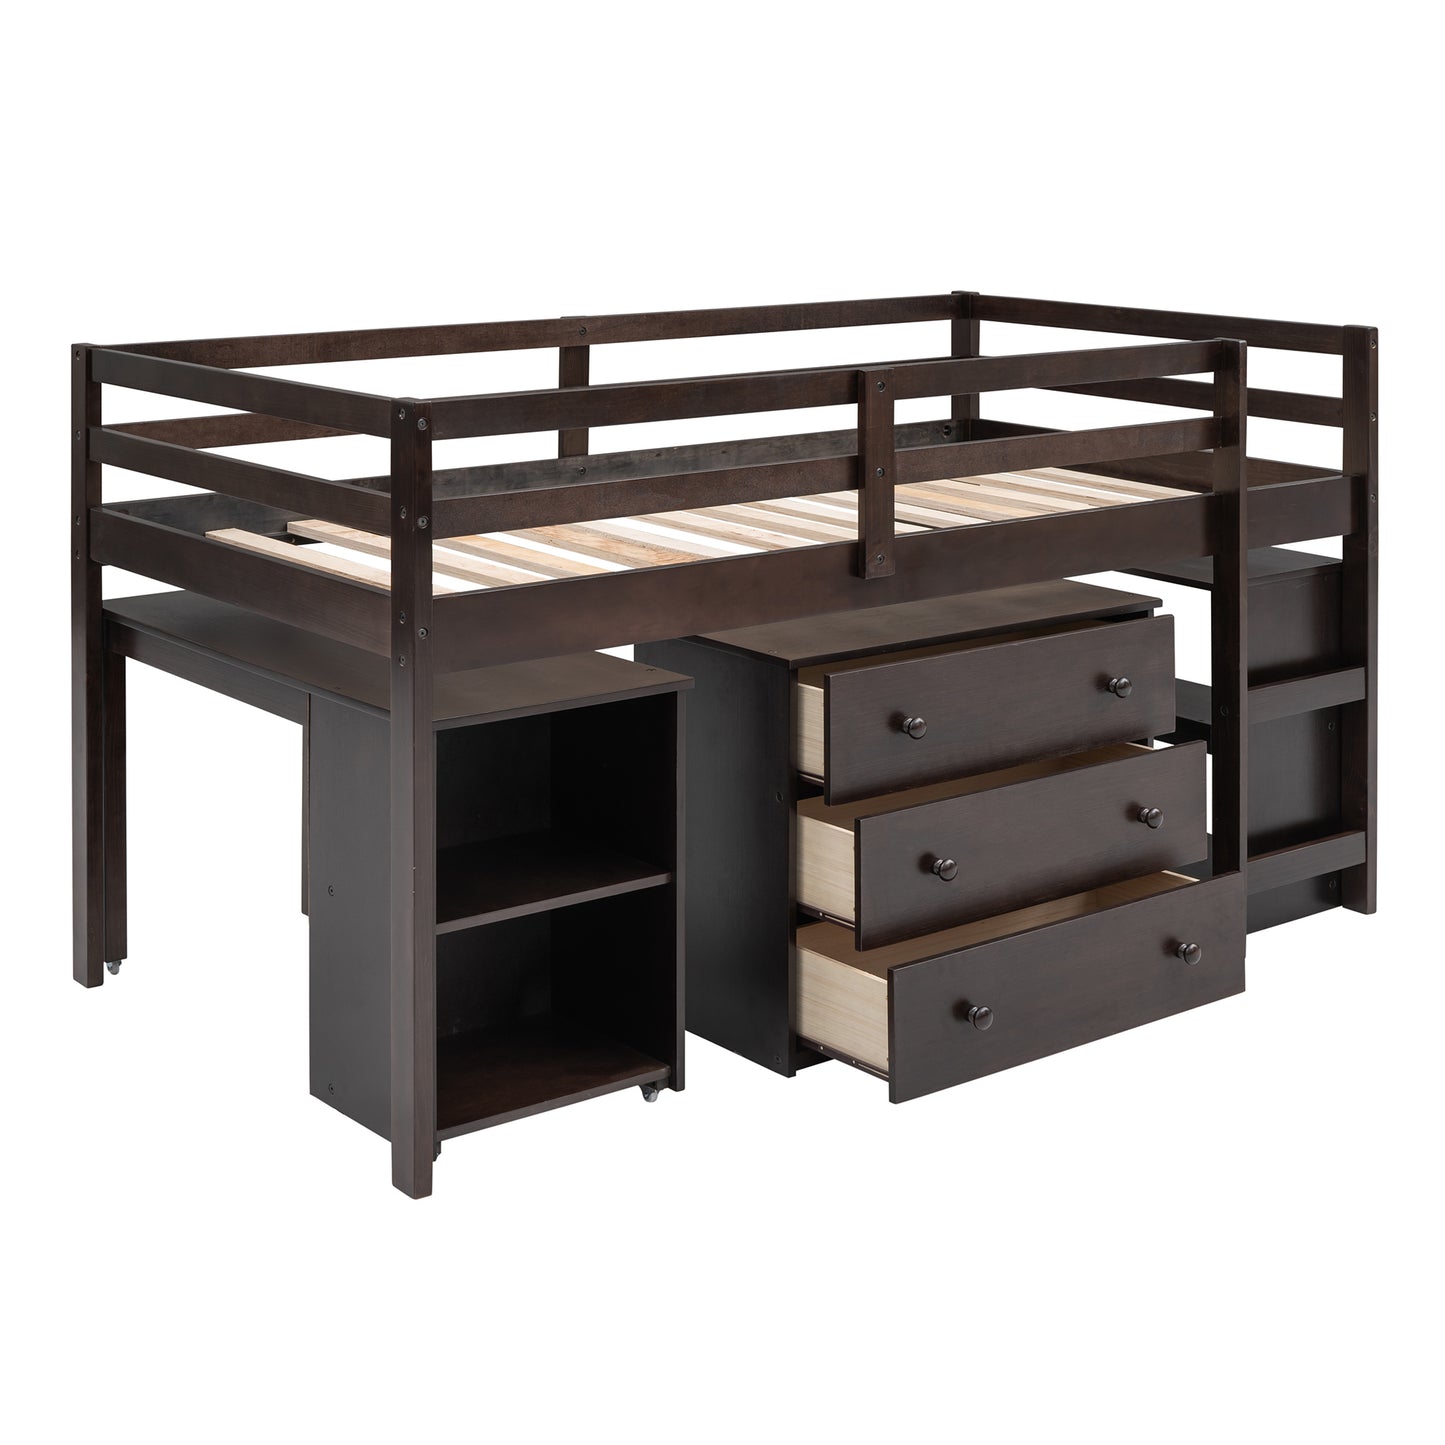 Low Study Twin Loft Bed with Cabinet and Rolling Portable Desk - Espresso